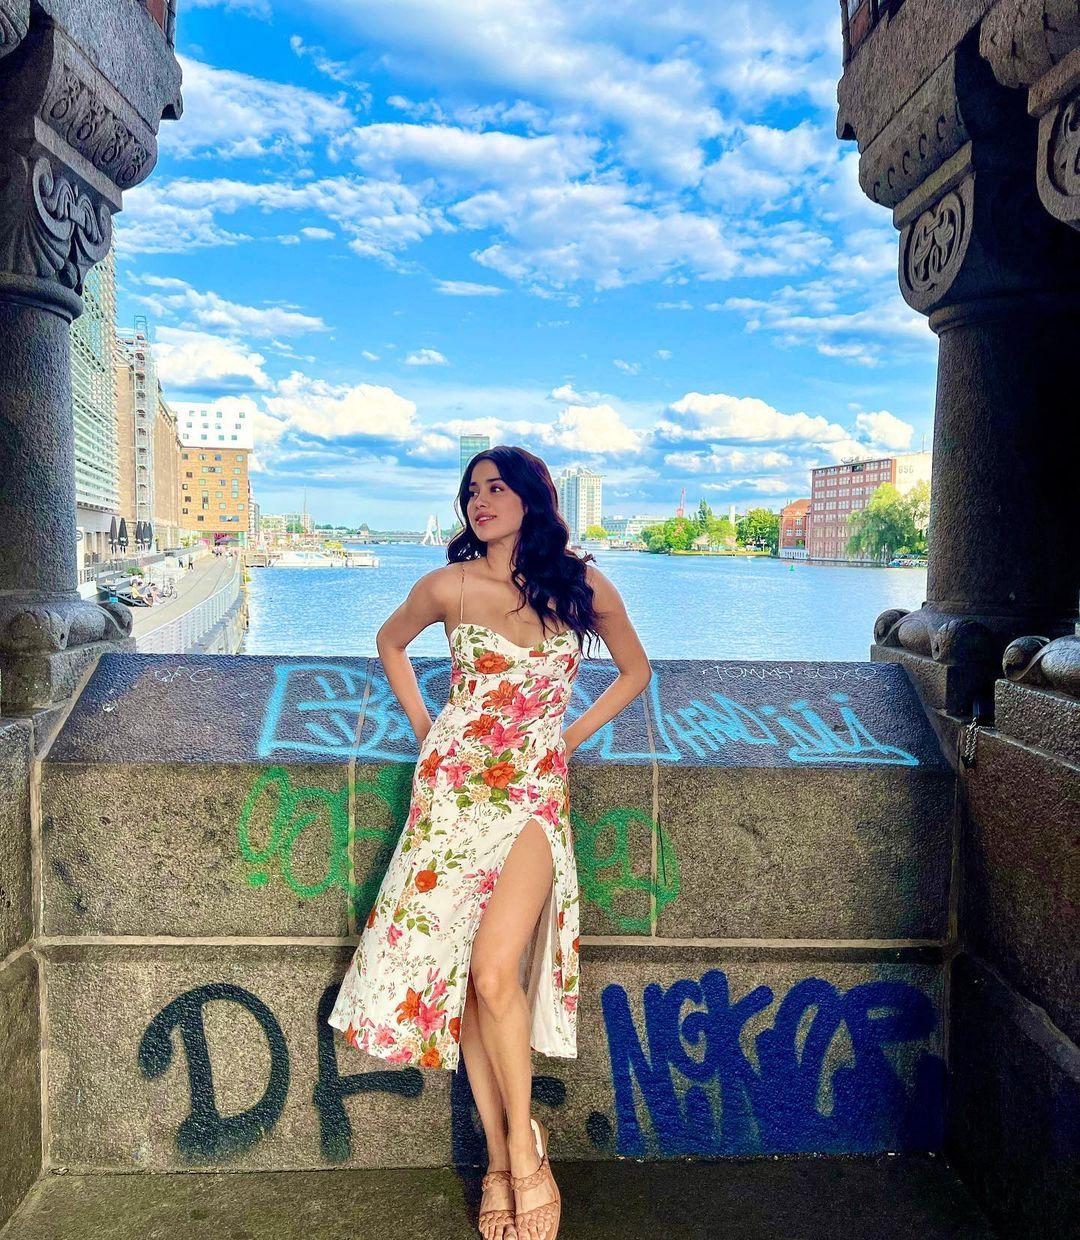 Janhvi Kapoor nails the perfect outfit for Propose Day in a stylish floral dress. The strappy dress complements her figure perfectly, tailored to fit and featuring a side slit that adds a touch of romance suitable for a European summer getaway.